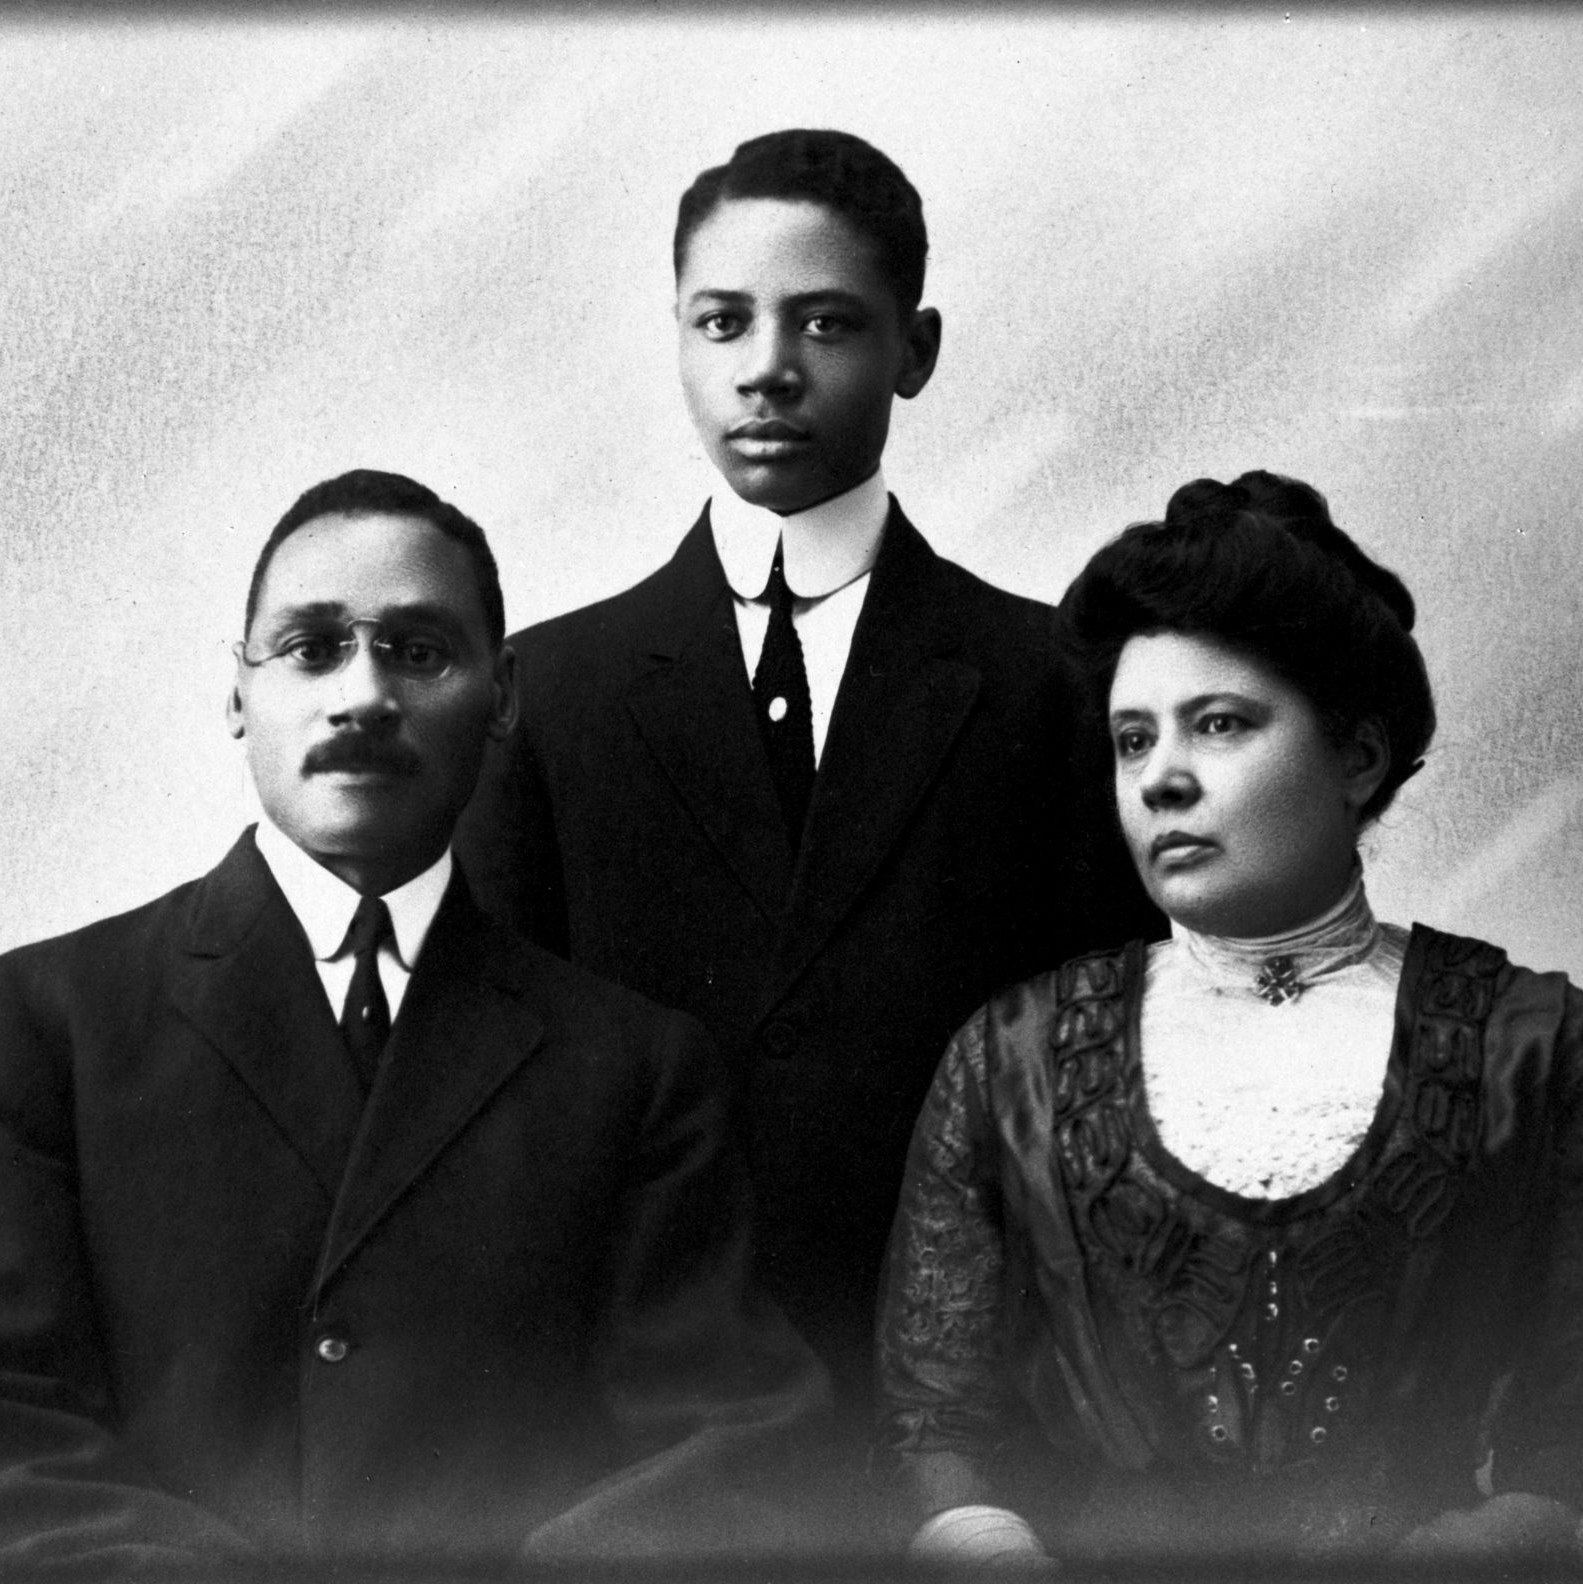 A teenage Charles Houston poses for a portrait with his parents, seated in front of him. His father, William Le Pre Houston, sits to the left, while his mother, Mary Hamilton Houston, is seated on the right.